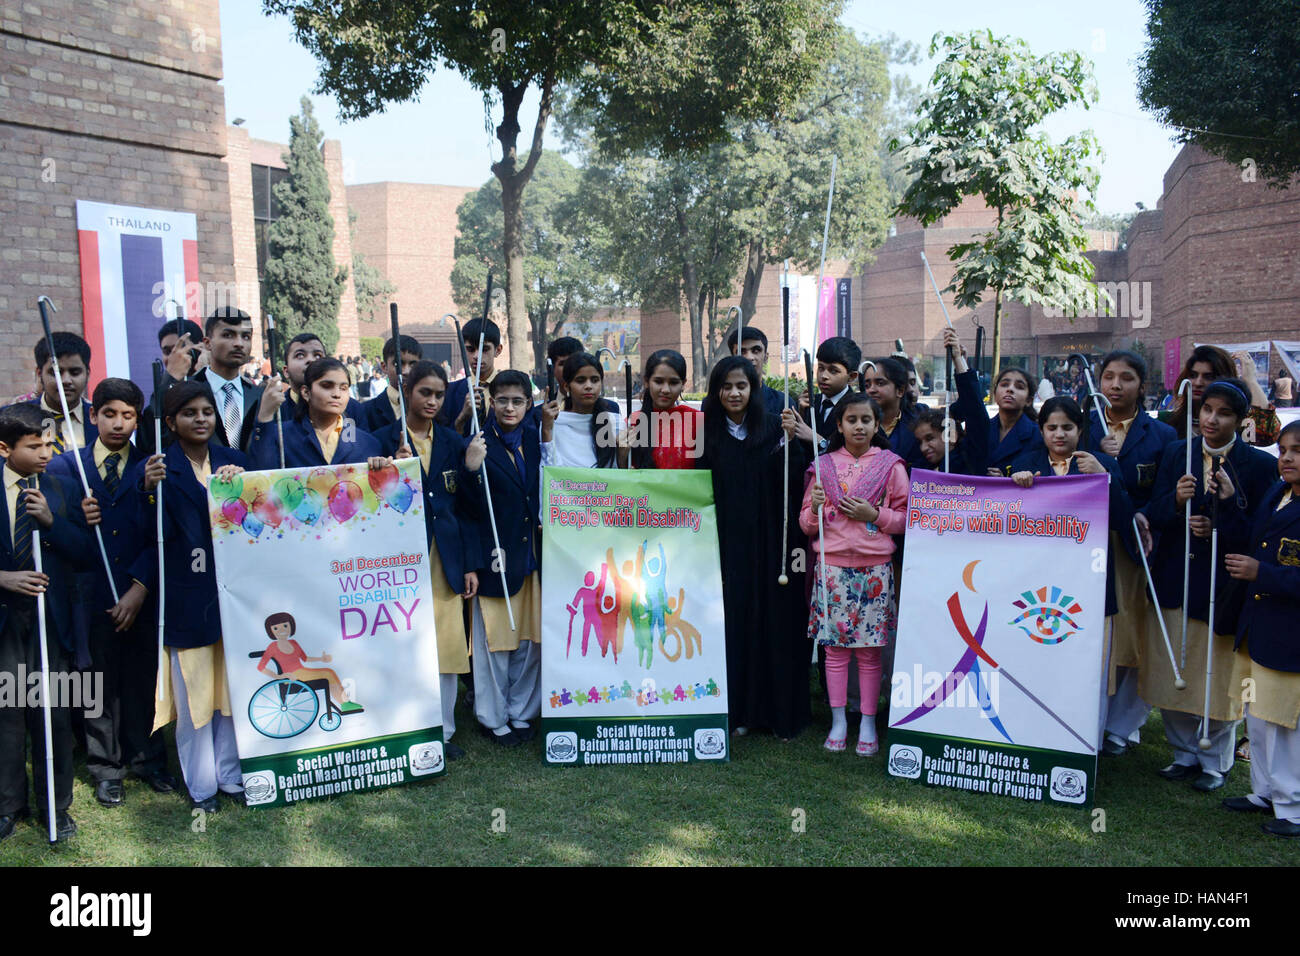 Lahore. 3rd Dec, 2016. Pakistani disabled students attend a rally to mark the International Day of Persons with Disabilities in Pakistan's Lahore on Dec. 3, 2016. Credit:  Sajjad/Xinhua/Alamy Live News Stock Photo